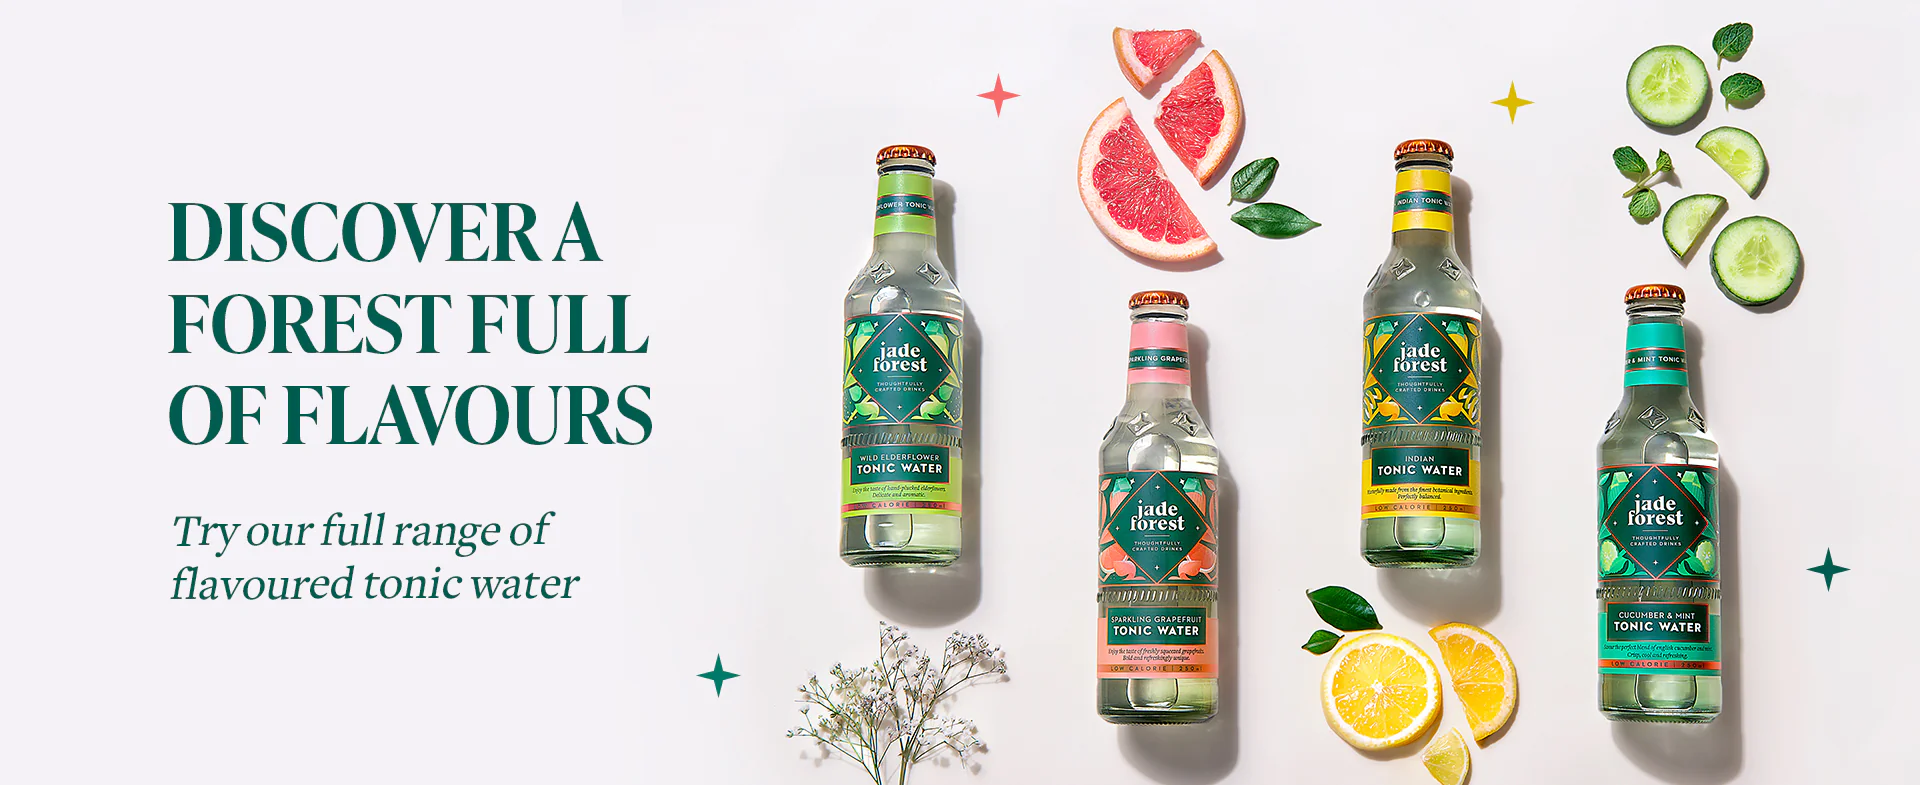 Homepage_banner_1_-_Flavoured_Tonic_Water_ae270506-8bbf-499c-82cf-6685e8cea2d7_1920x